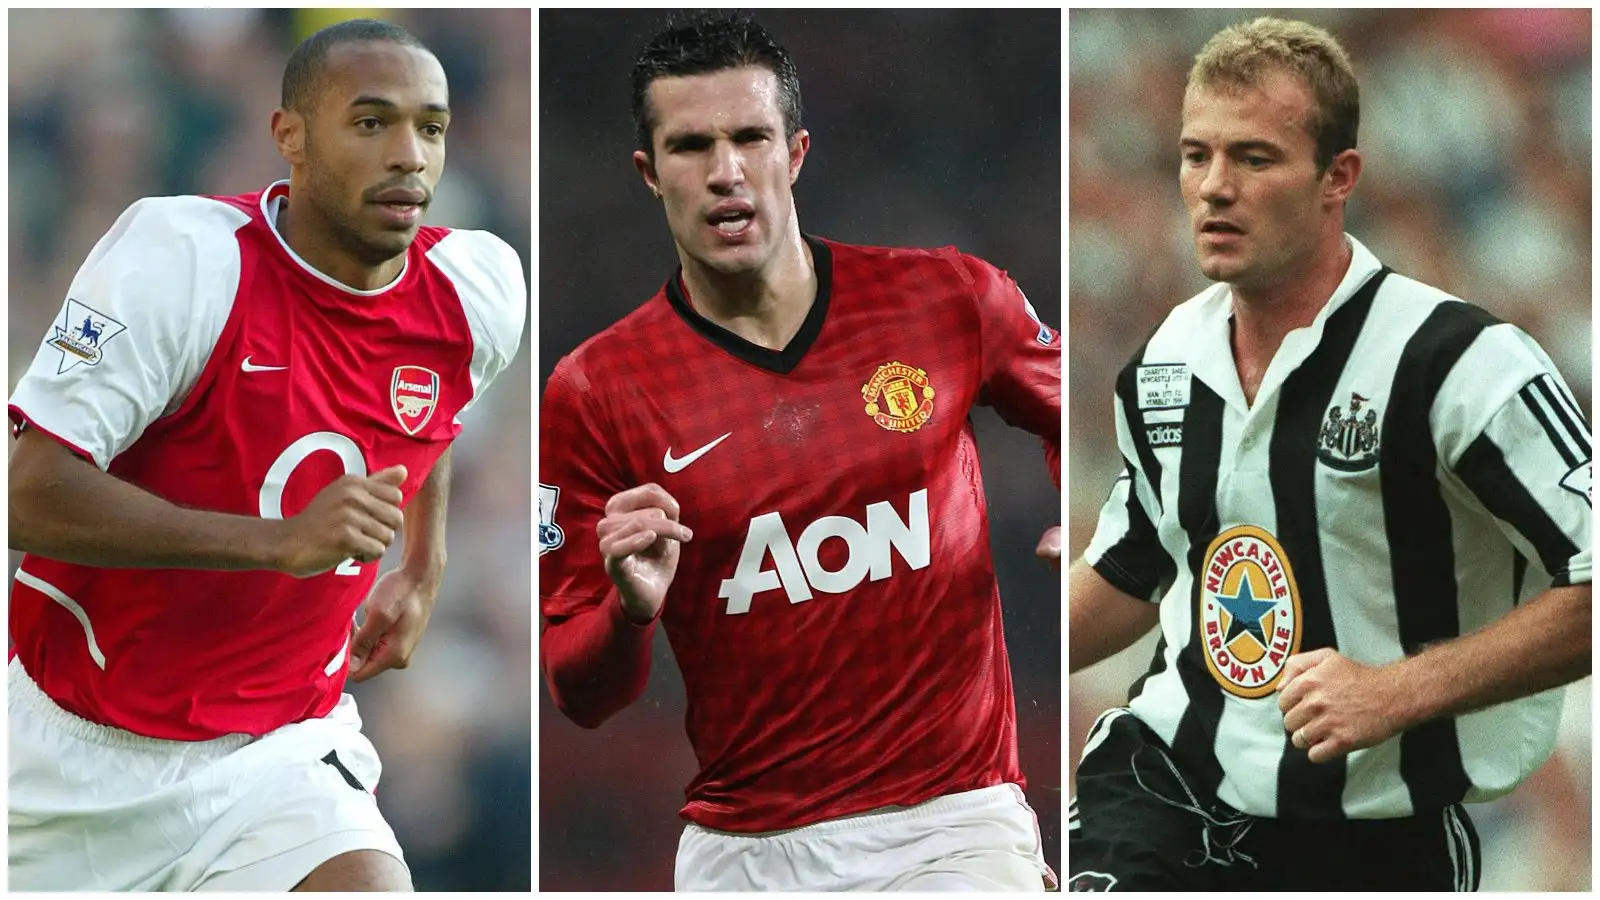 Thierry Henry, Robin van Persie and Alan Shearer were all signed after their new clubs finished as Premier League runners-up.